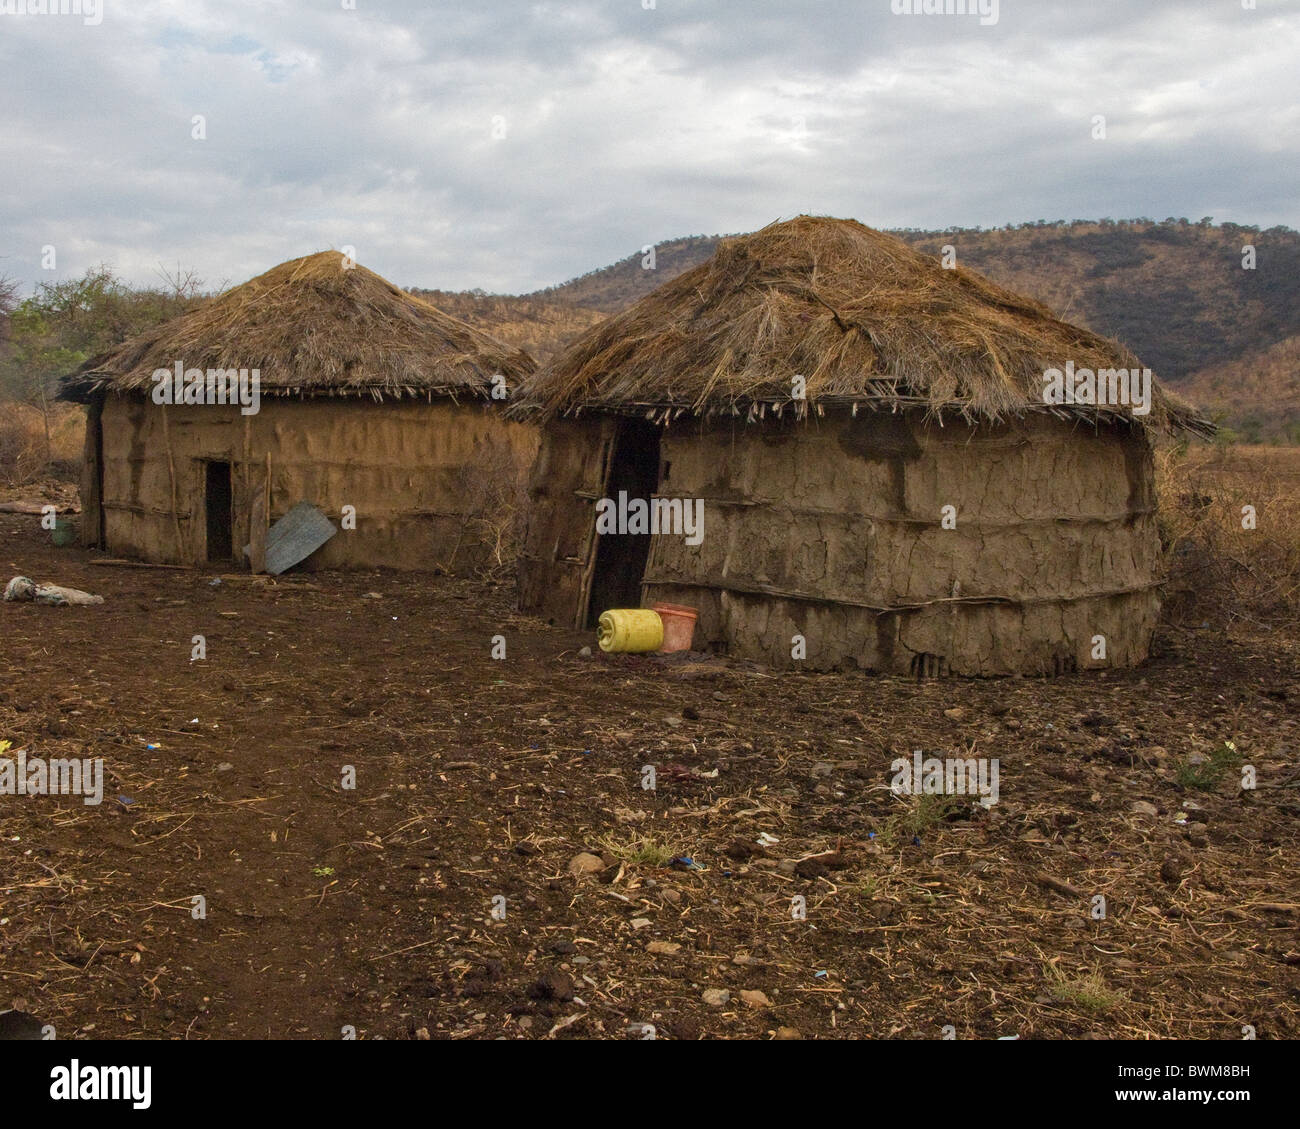 Traditional Masai mud and thatch huts in Tanzania. Stock Photo